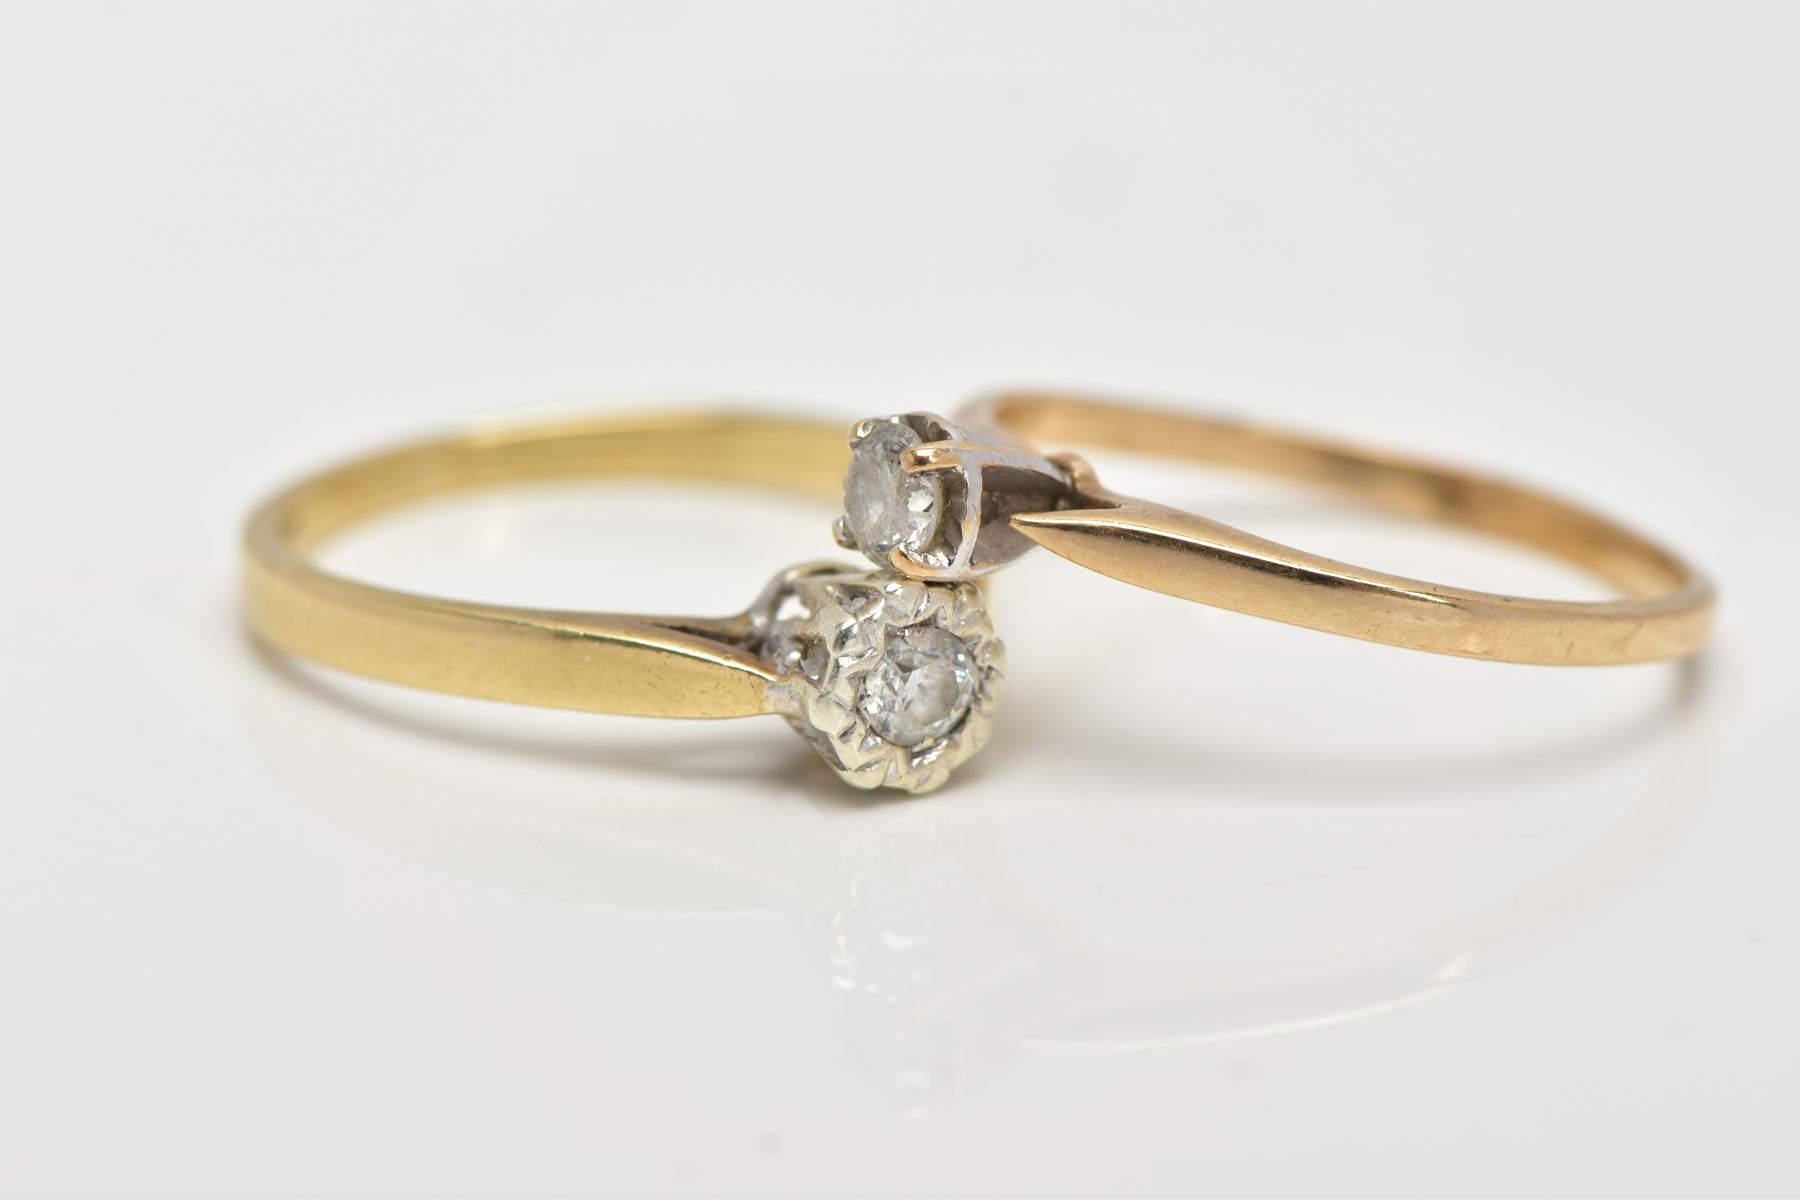 TWO SINGLE STONE DIAMOND RINGS, the first designed with an illusion set round brilliant cut diamond, - Image 2 of 4